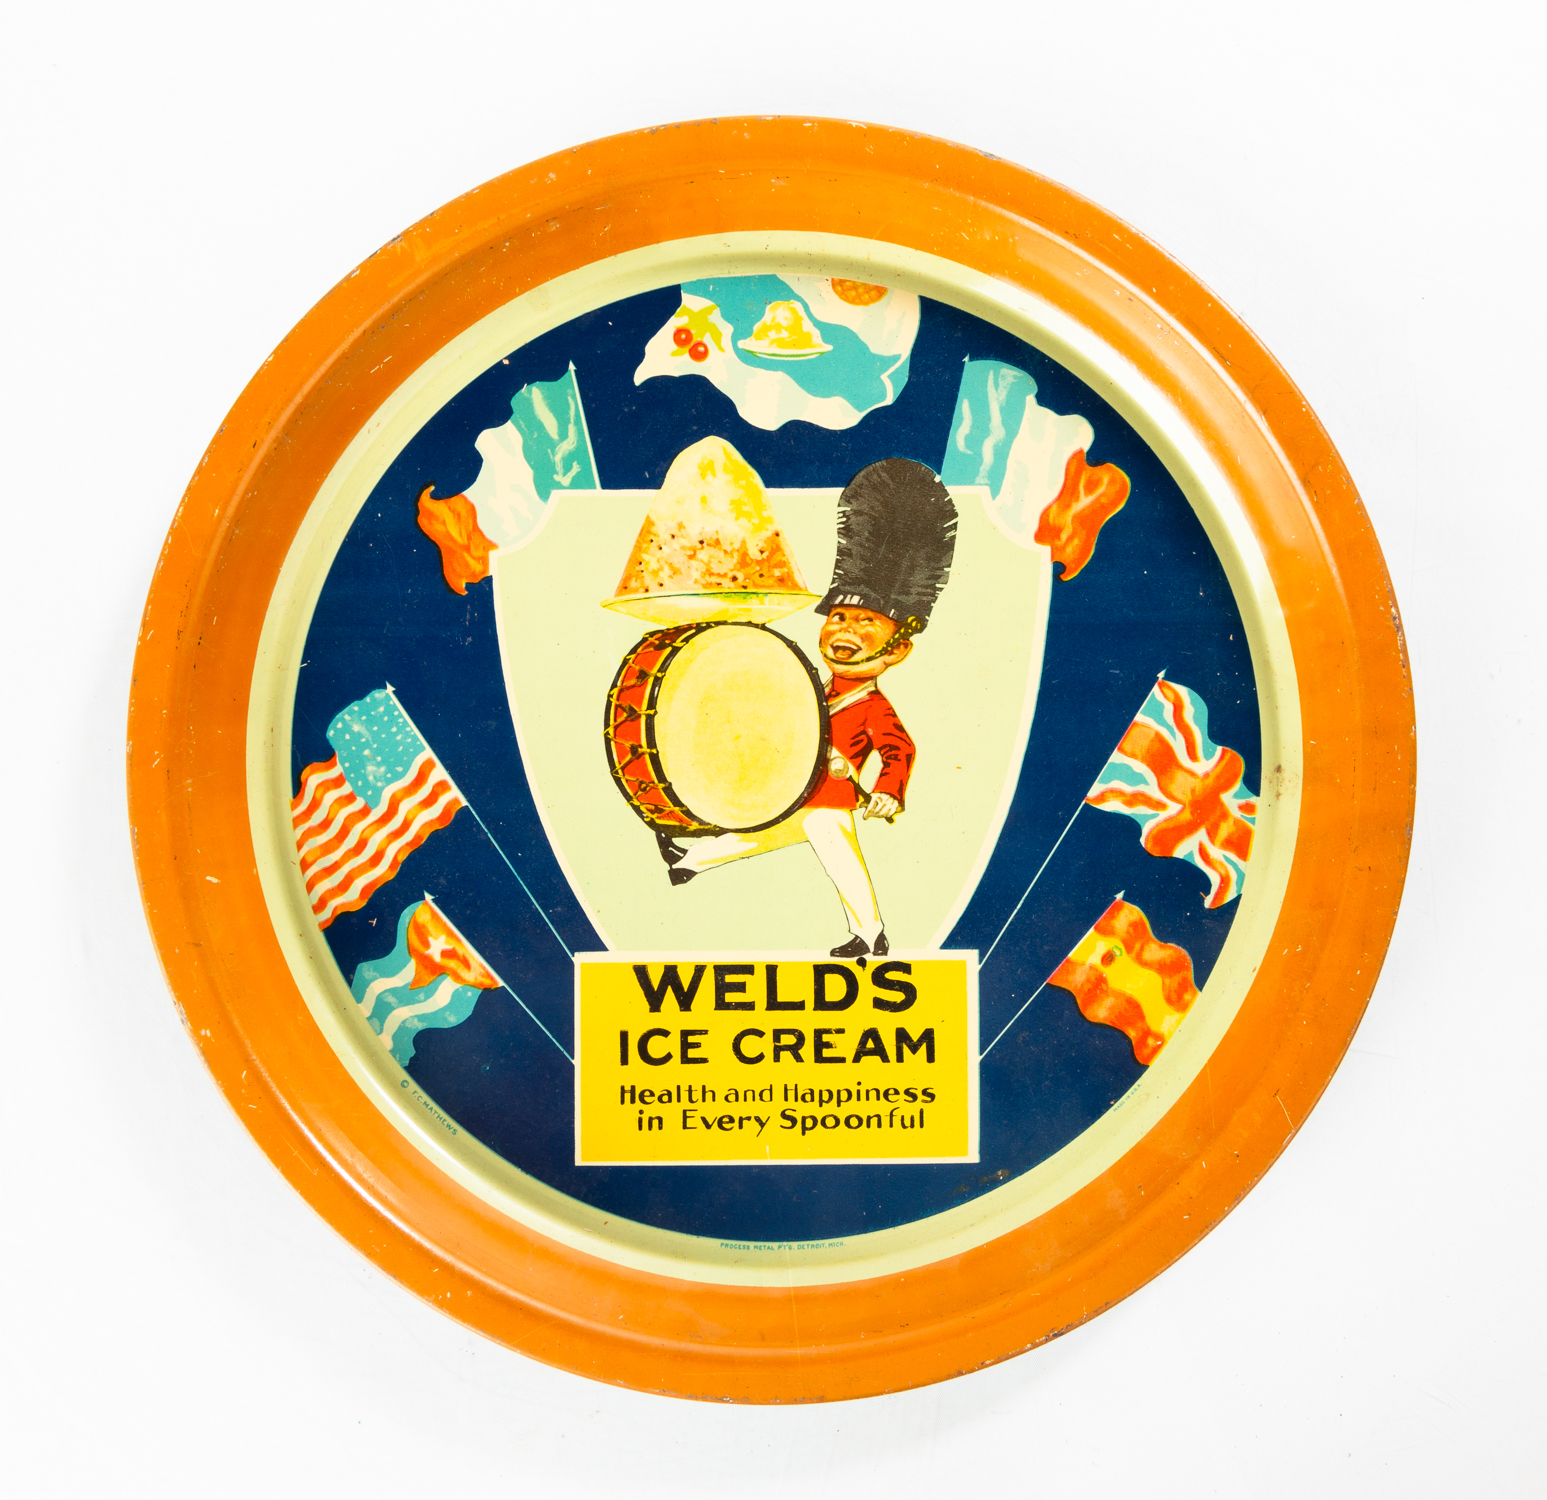 WELD S ICE CREAM ADVERTISING TRAY 2faf5a4